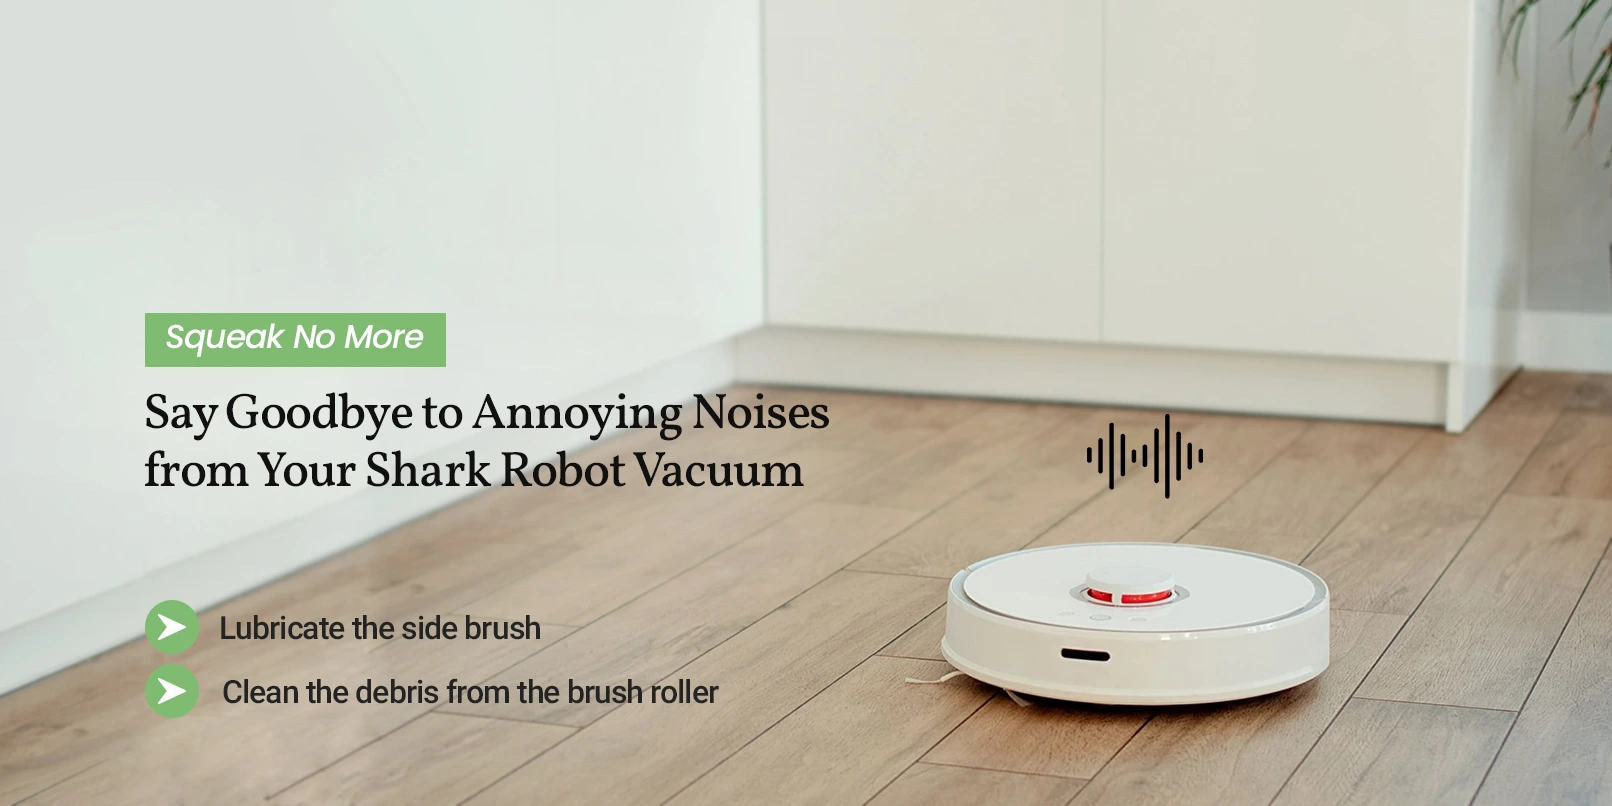 Shark Robot Vacuum Squeaking: Here’s a Quick guide